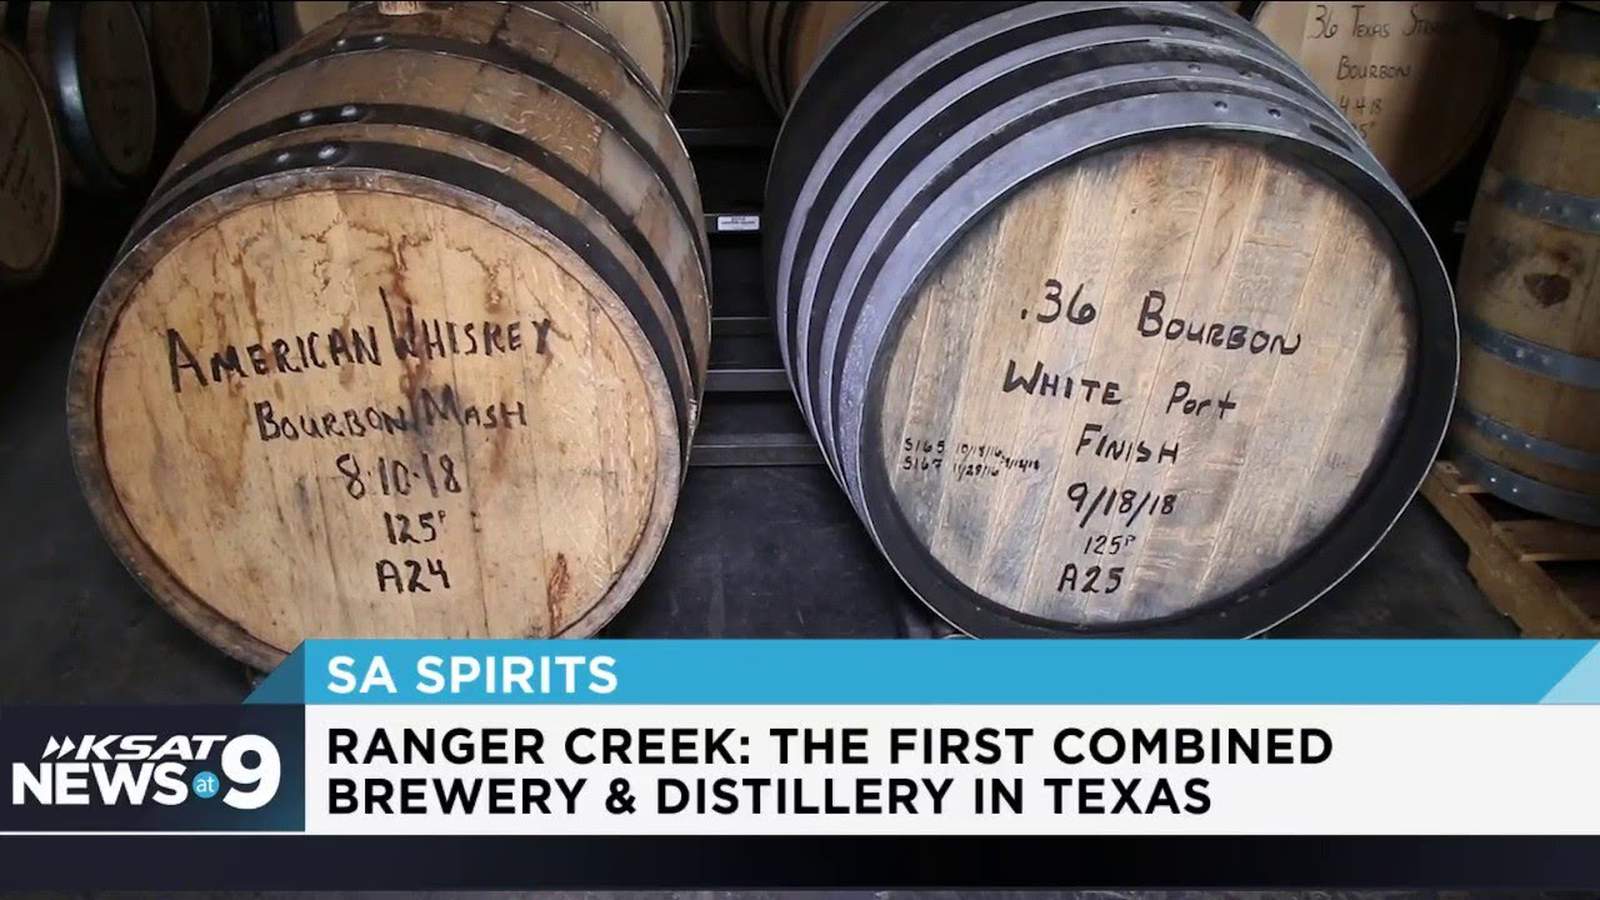 SA Spirits: Behind the scenes at Ranger Creek, Texas' first combined brewery, distillery